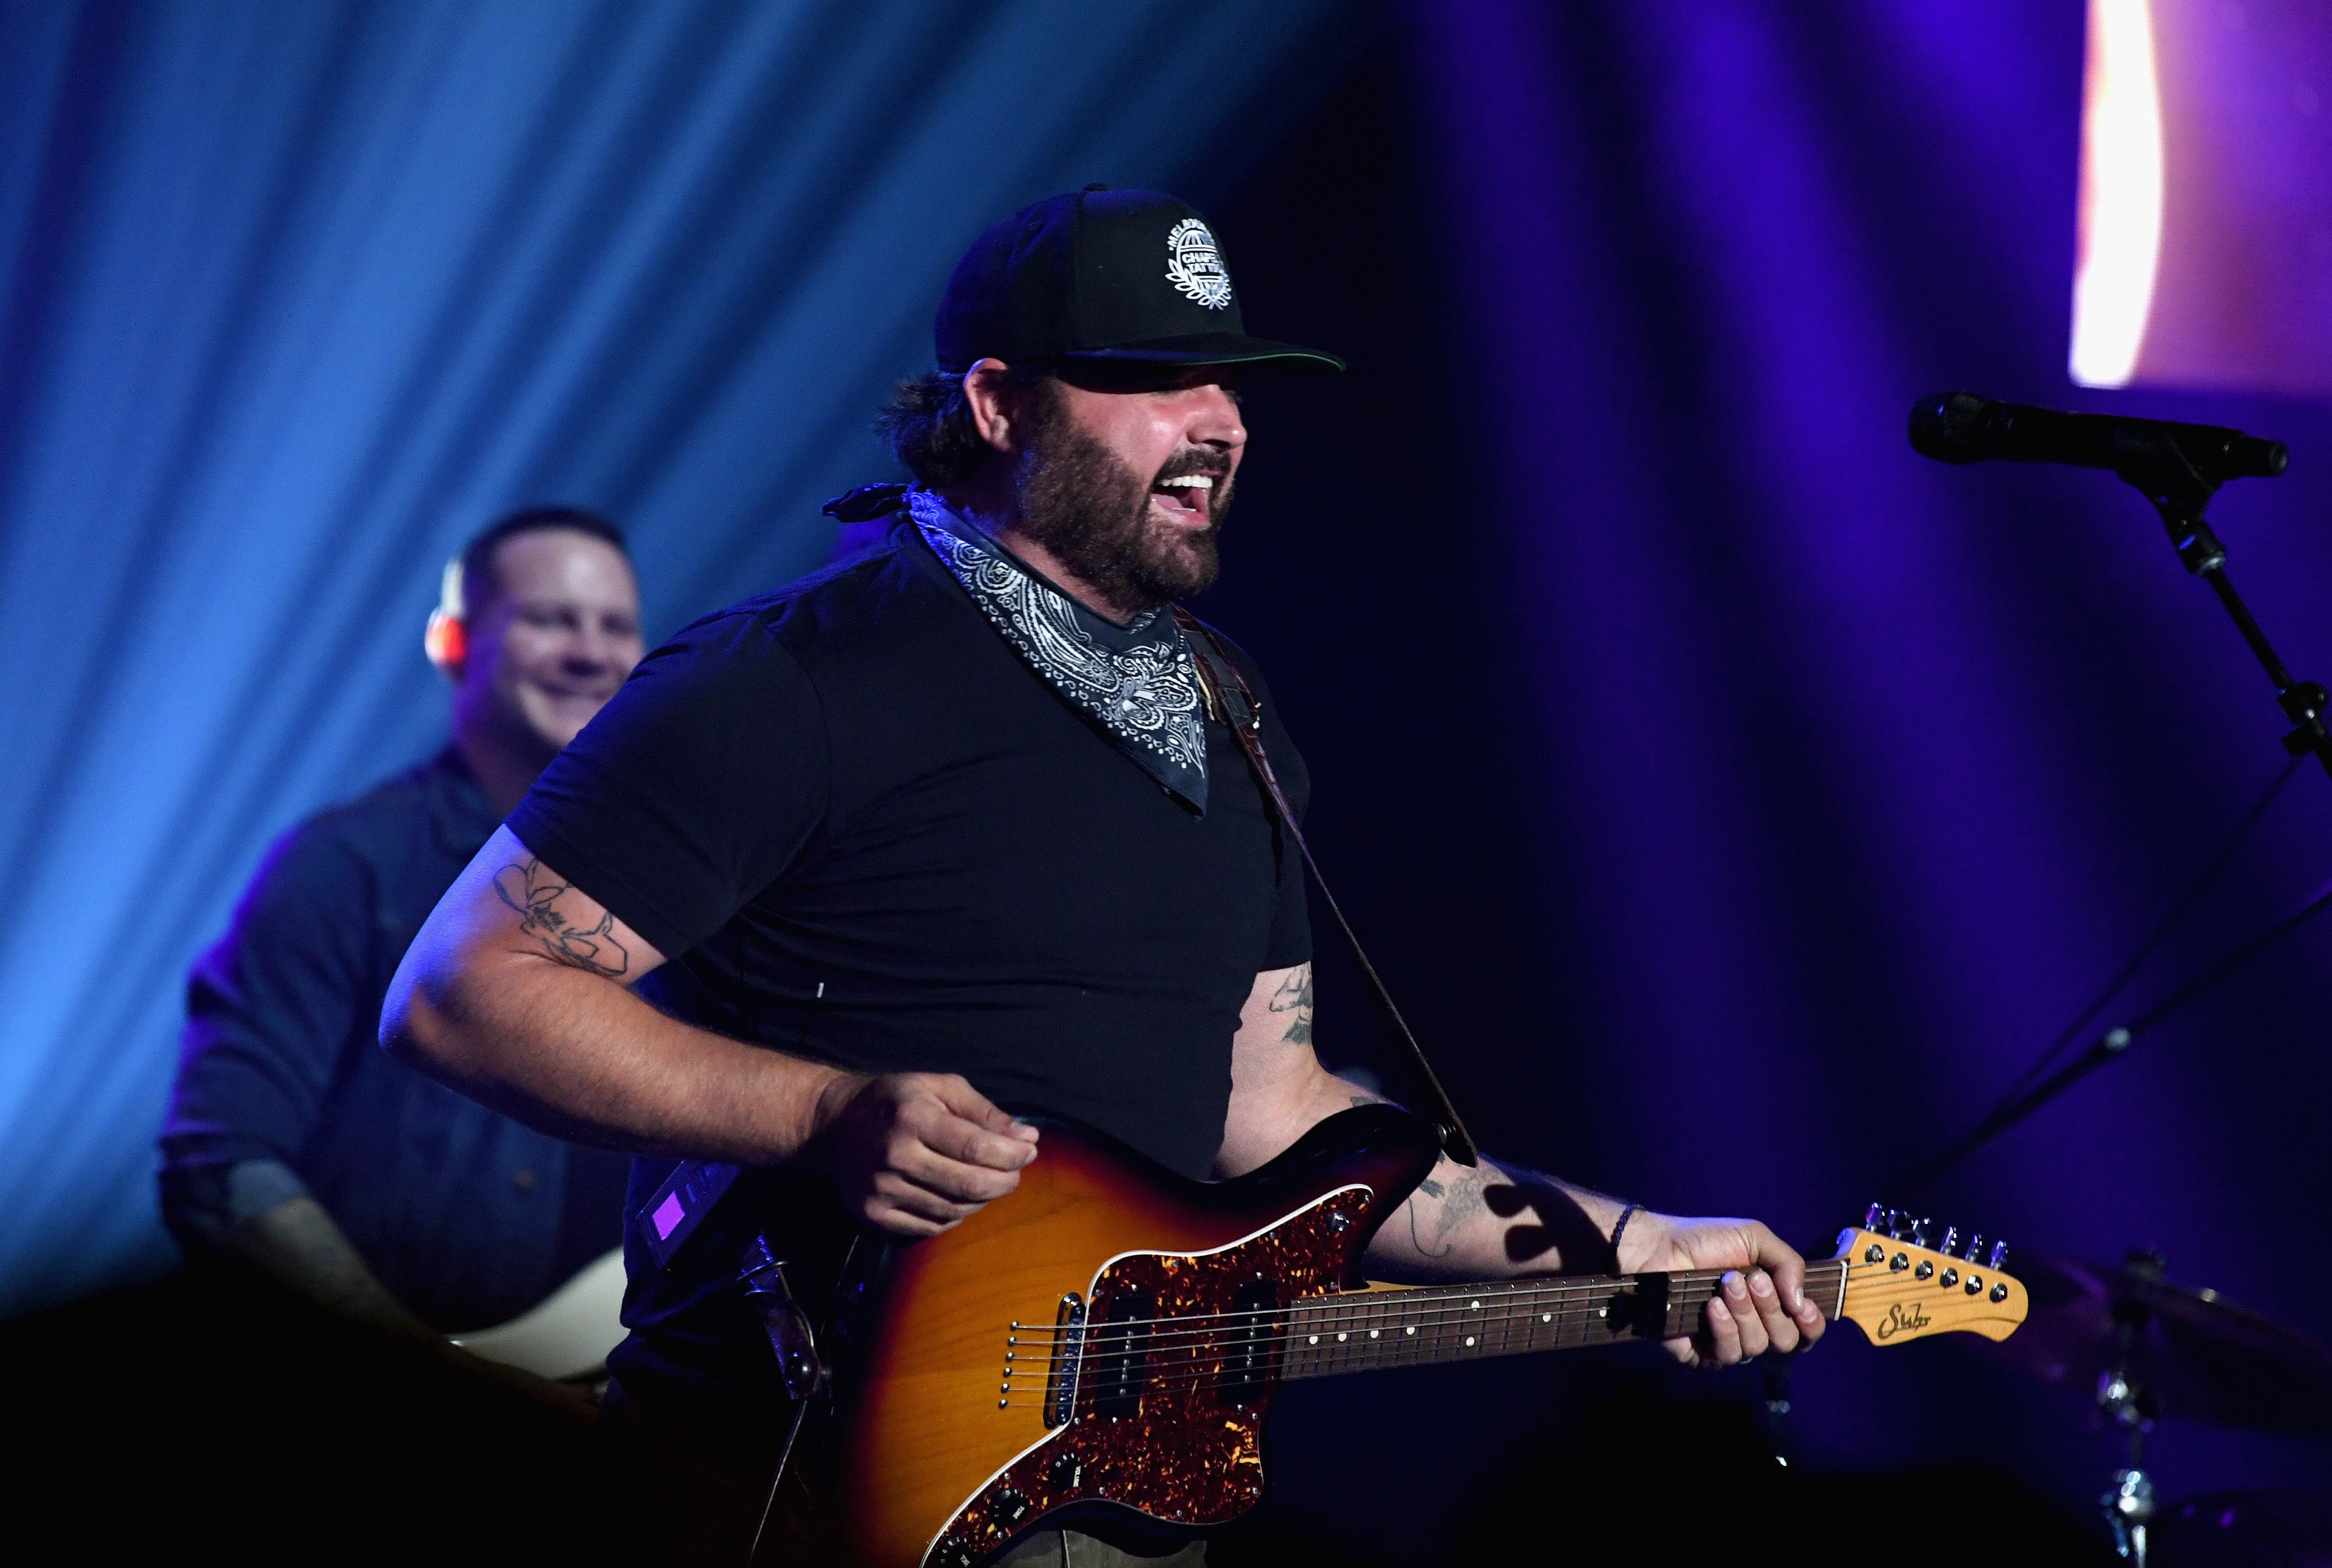 Randy Houser performs on stage during iHeartCountry Album Release Party at the iHeartRadio Theater LA